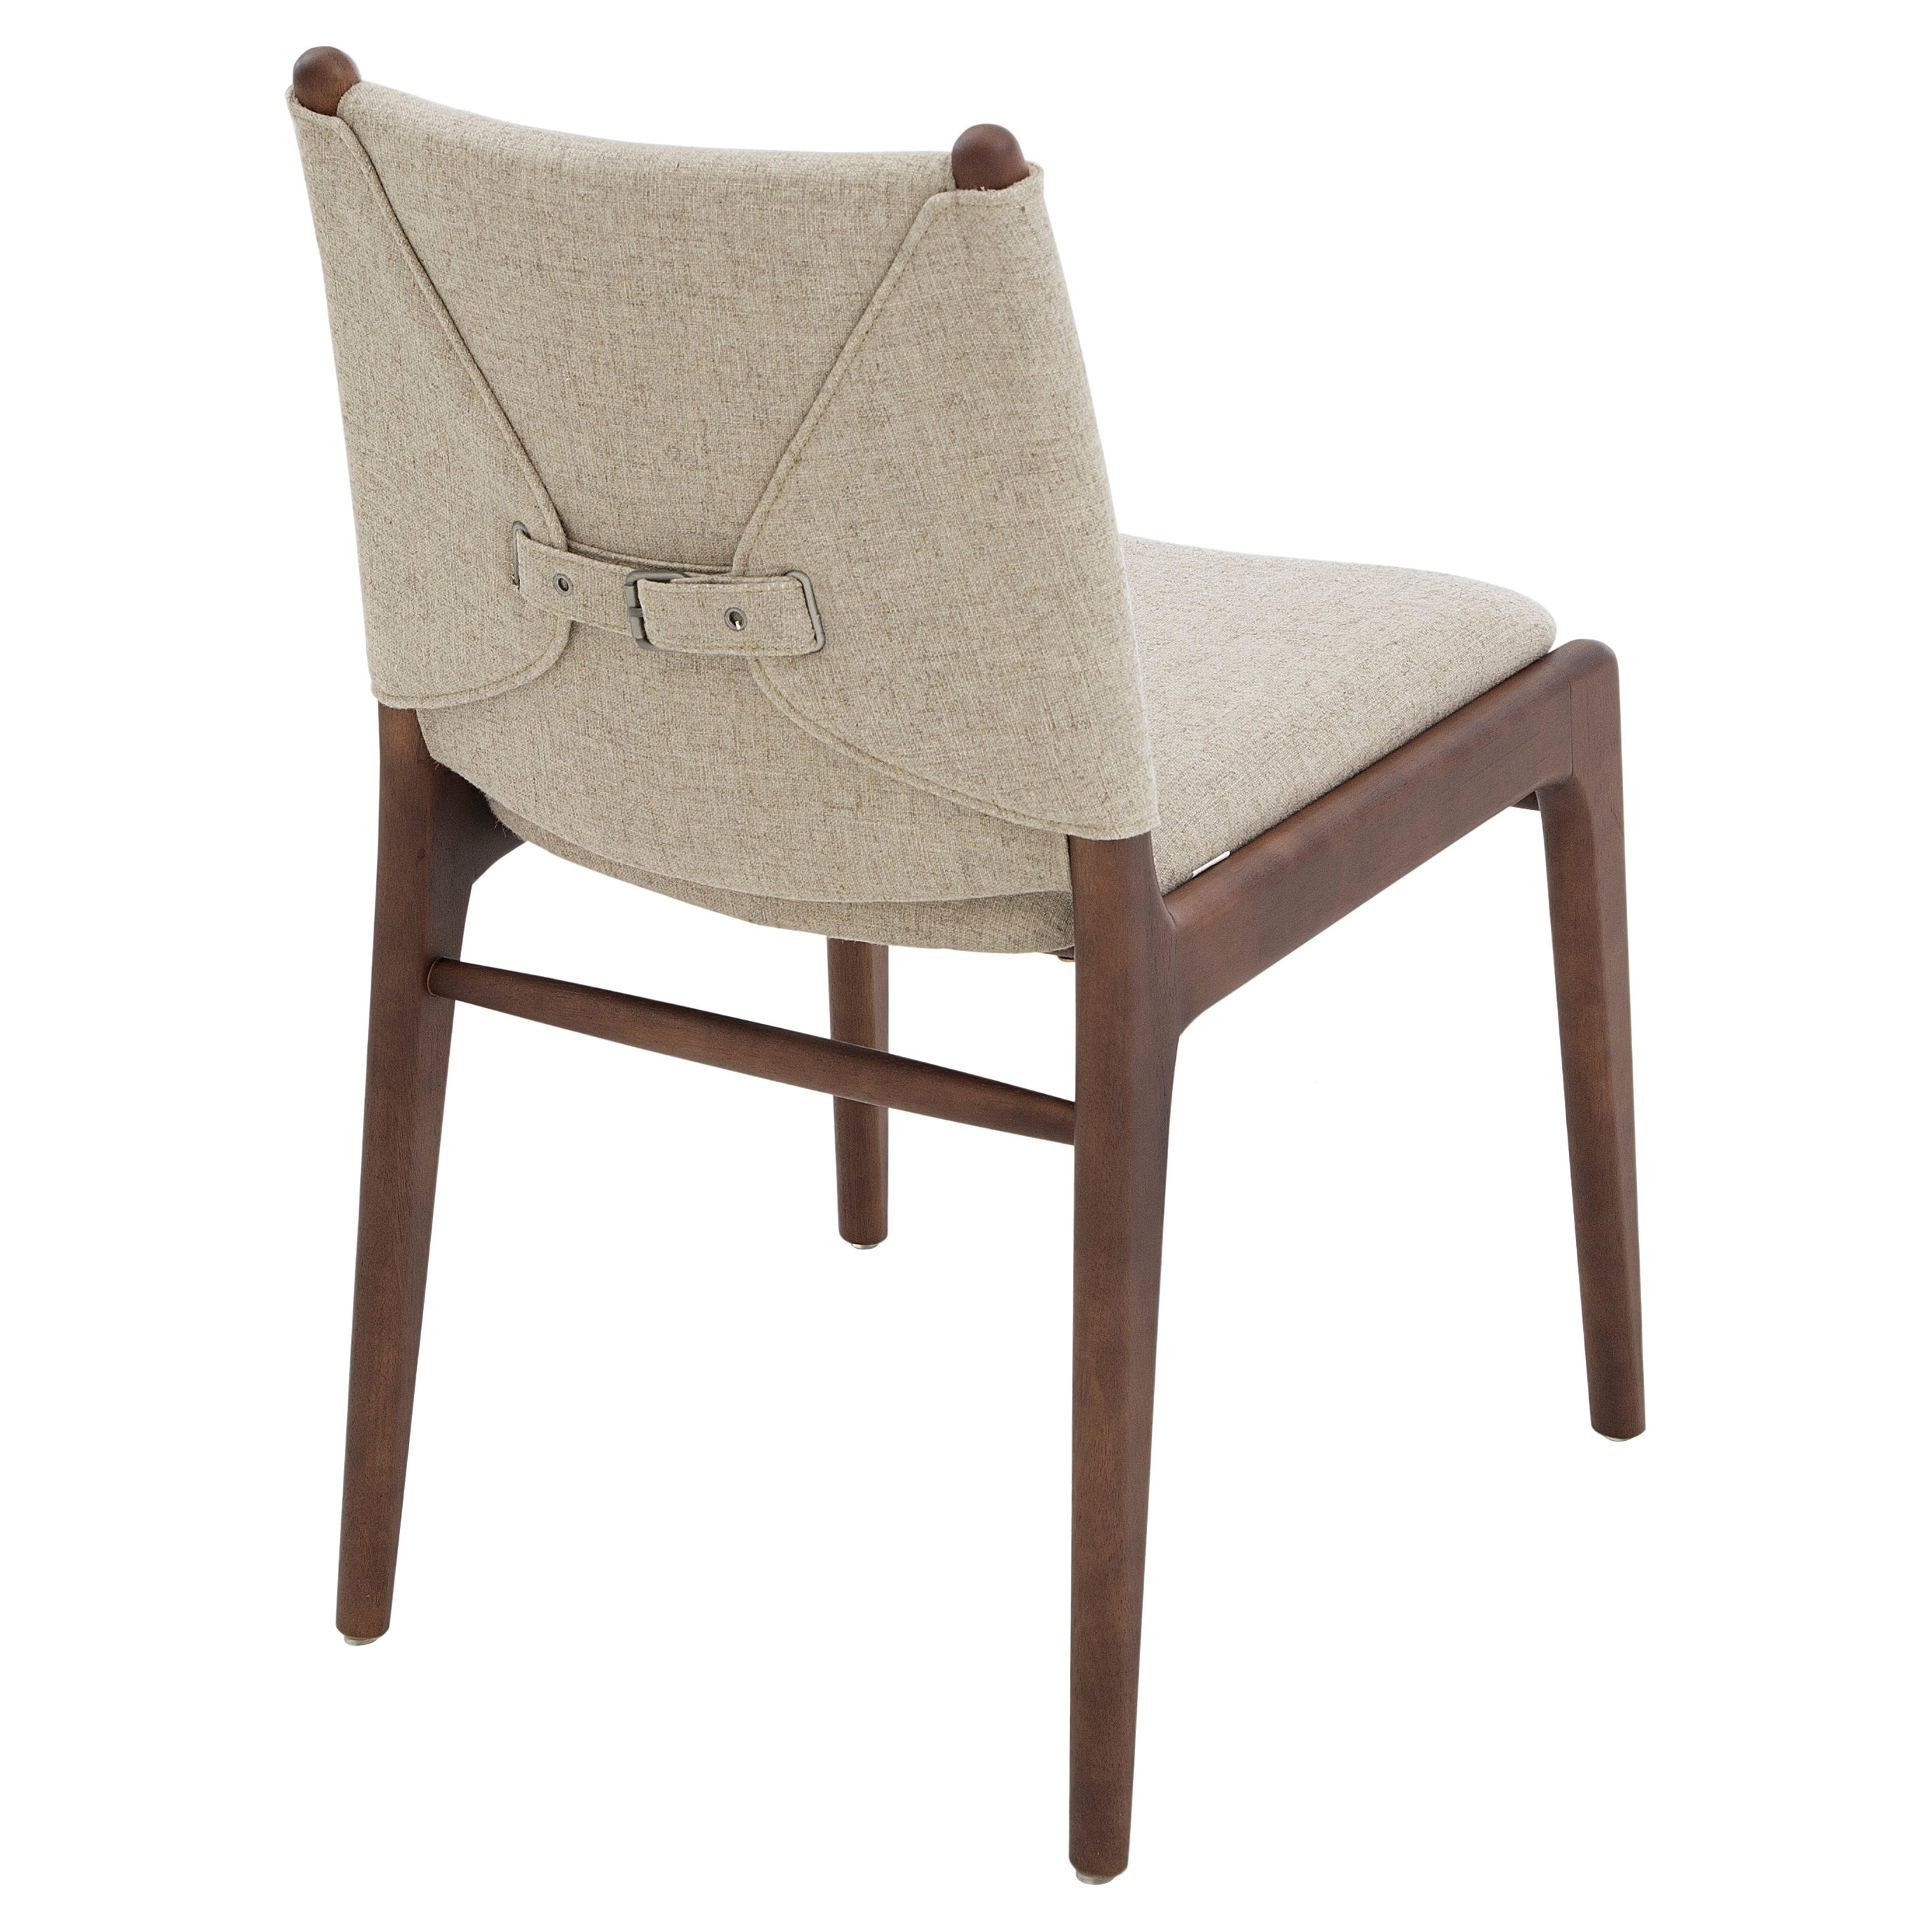 The Cappio chair highlights our beautiful walnut wood finish combined with a stunning beige fabric, this chair features a unique buckle design on the back of the seat. Our team at Uultis has designed this simple but elegant design that will